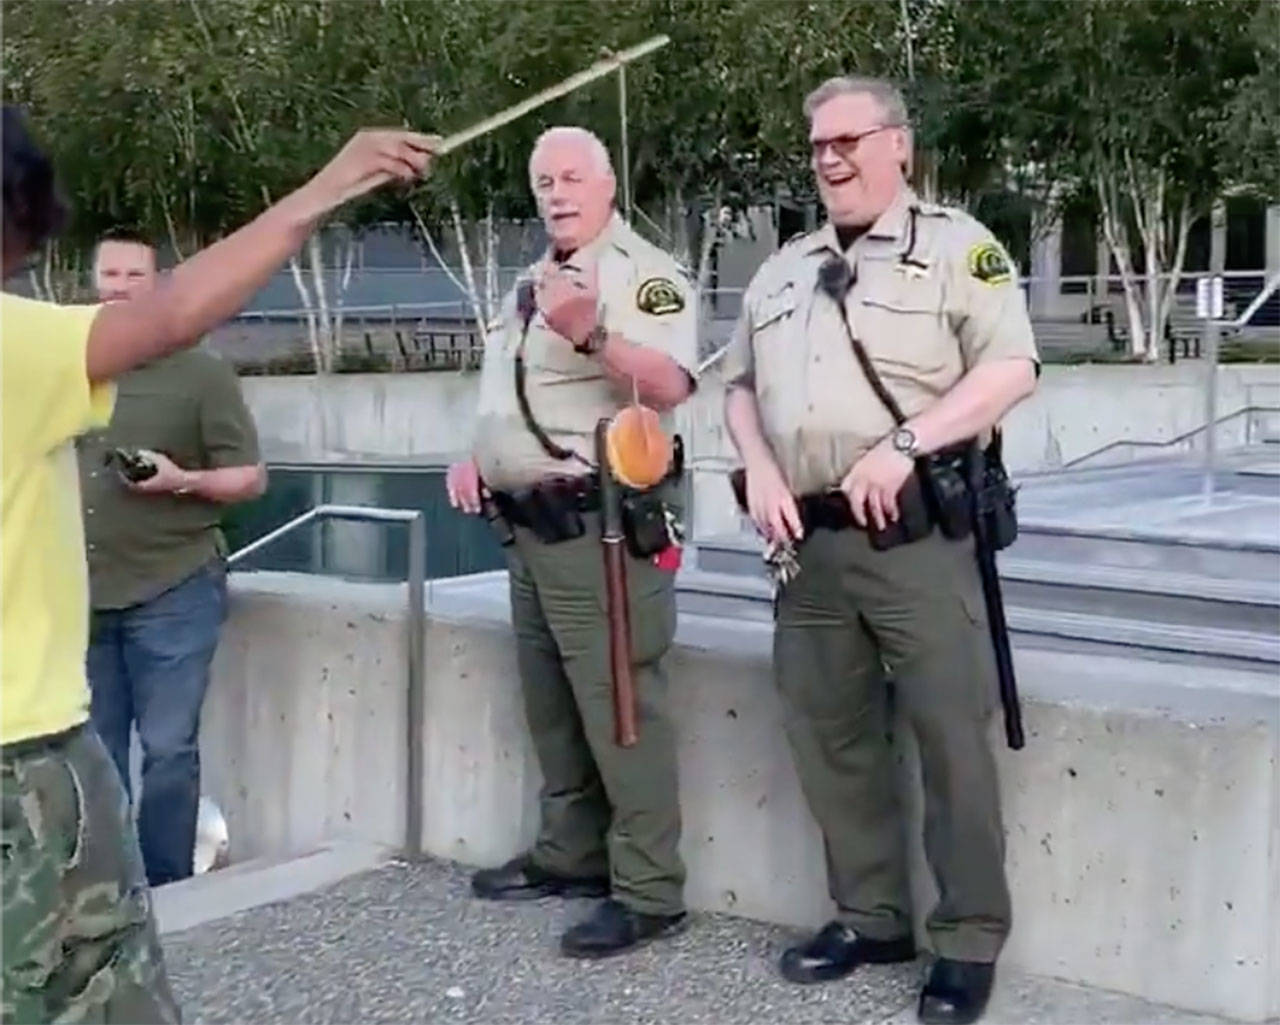 A man dangles a doughnut in front of police officers. (Screen grab from video courtesy of Bennett Haselton)